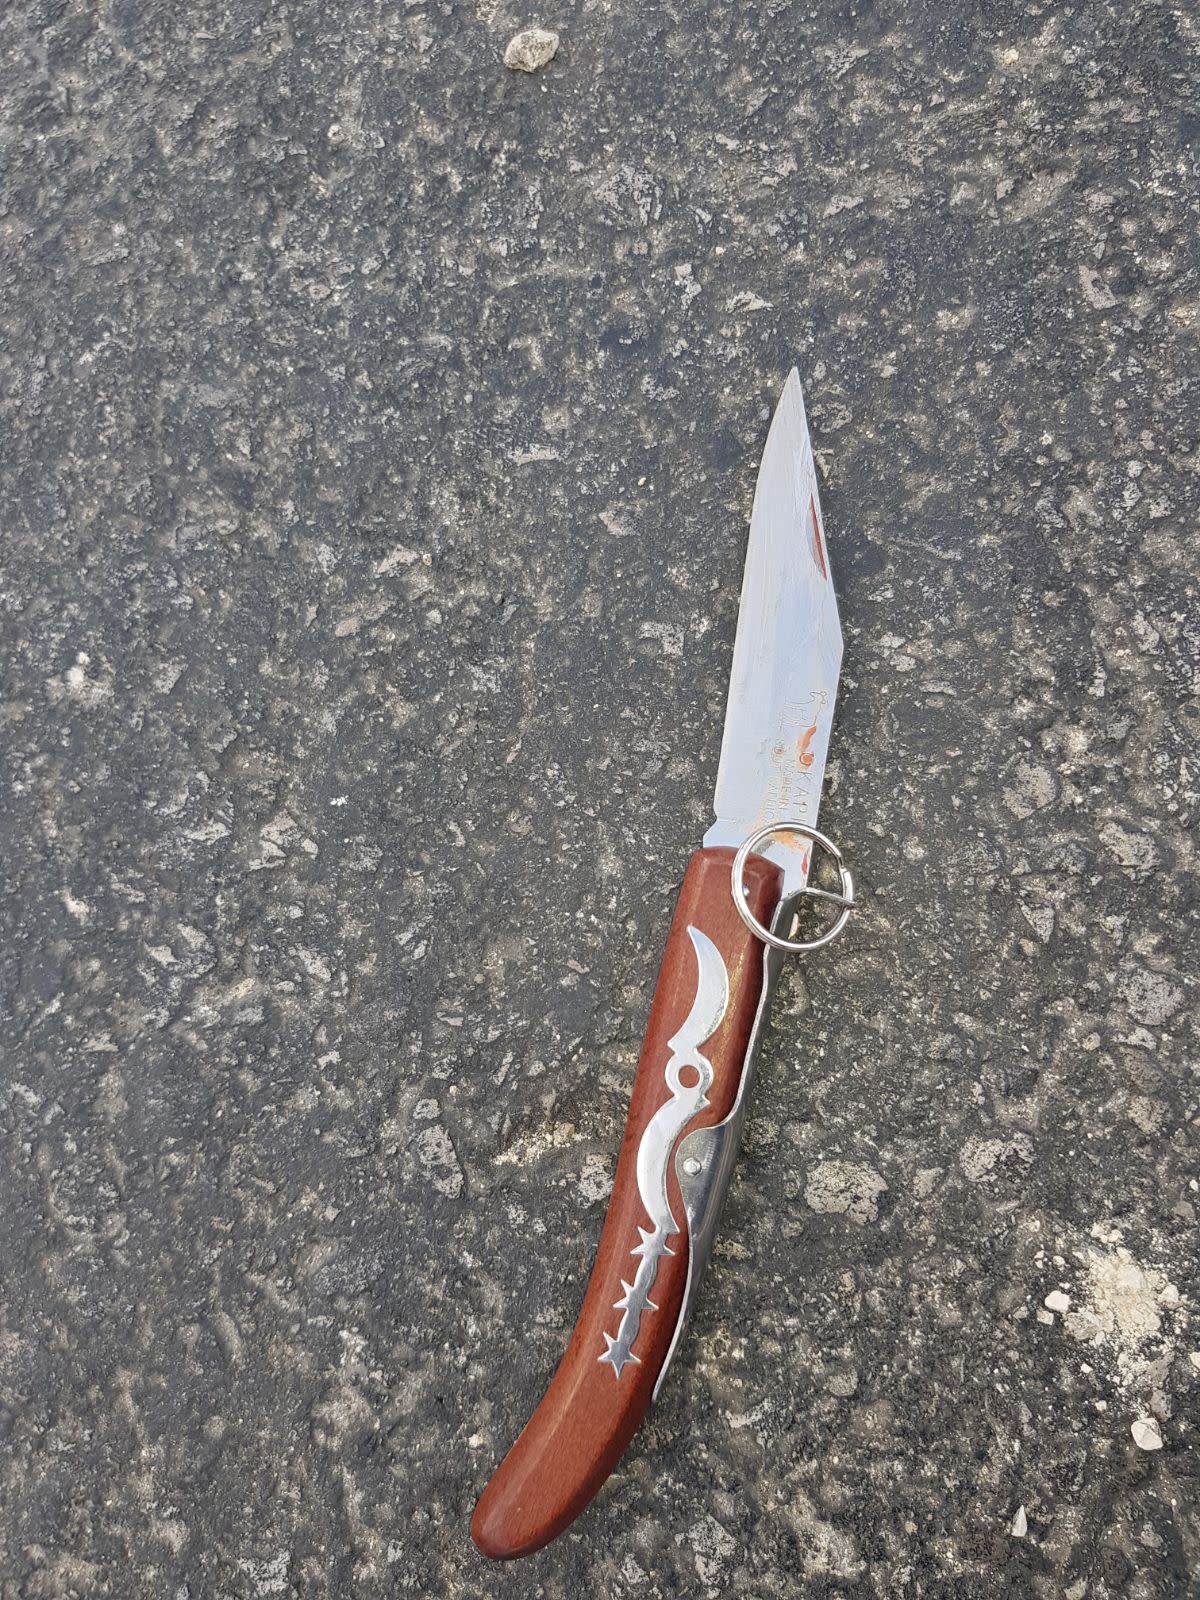 Knife used by Palestinian assailant in stabbing of Israel Border Police officer in Ramallah. (photo credit: POLICE SPOKESPERSON'S UNIT)